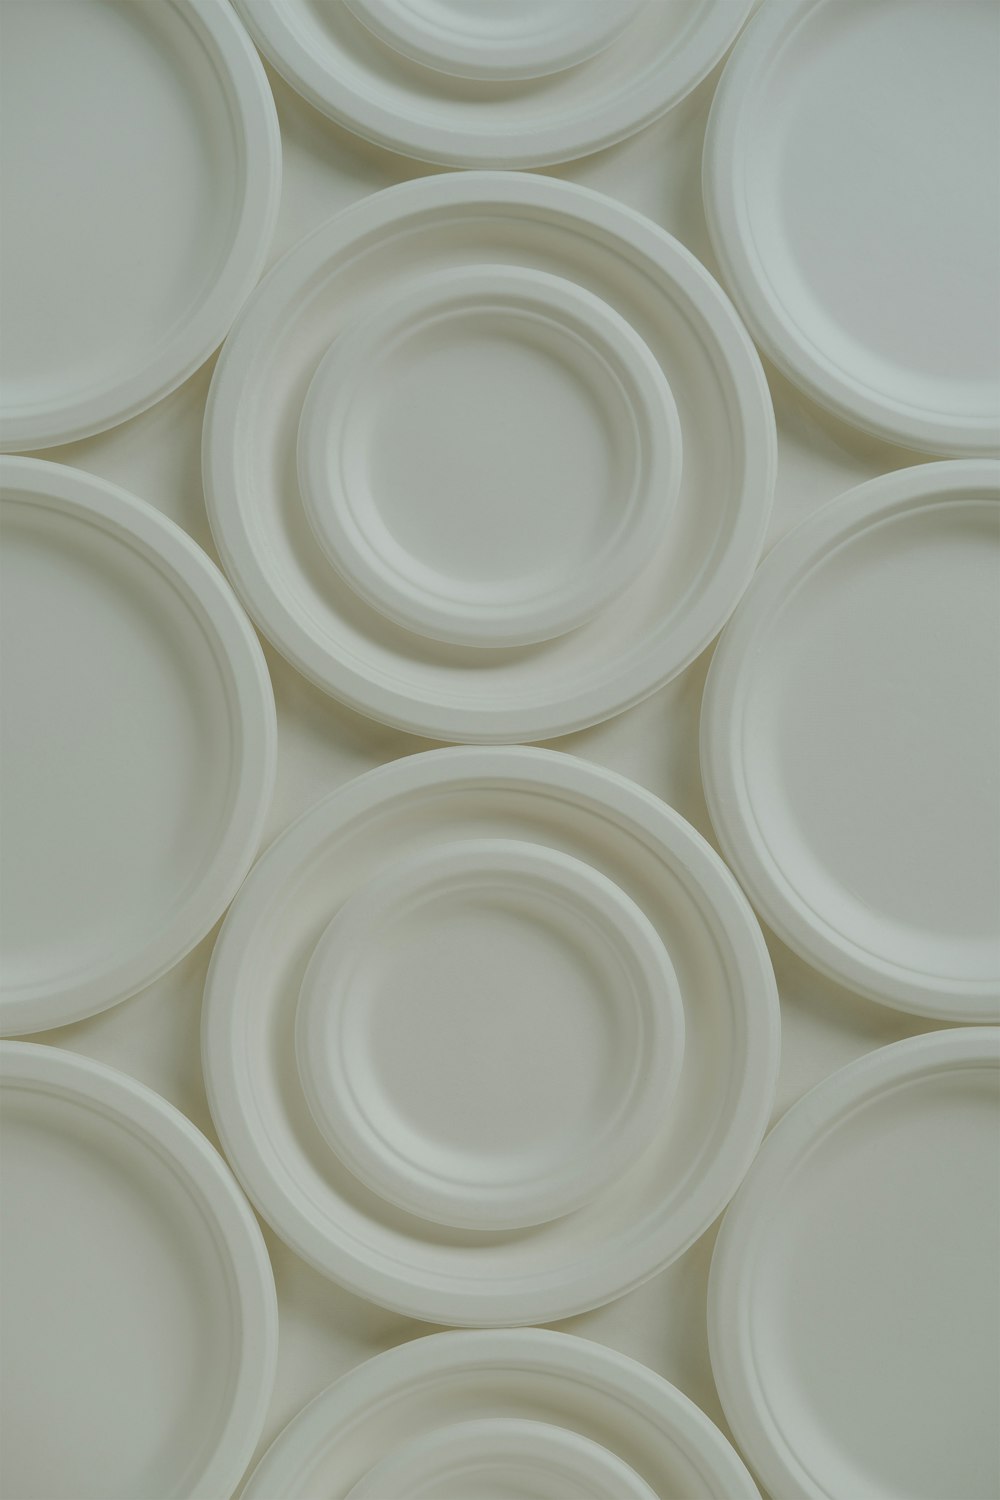 a close up of many white plates on a table